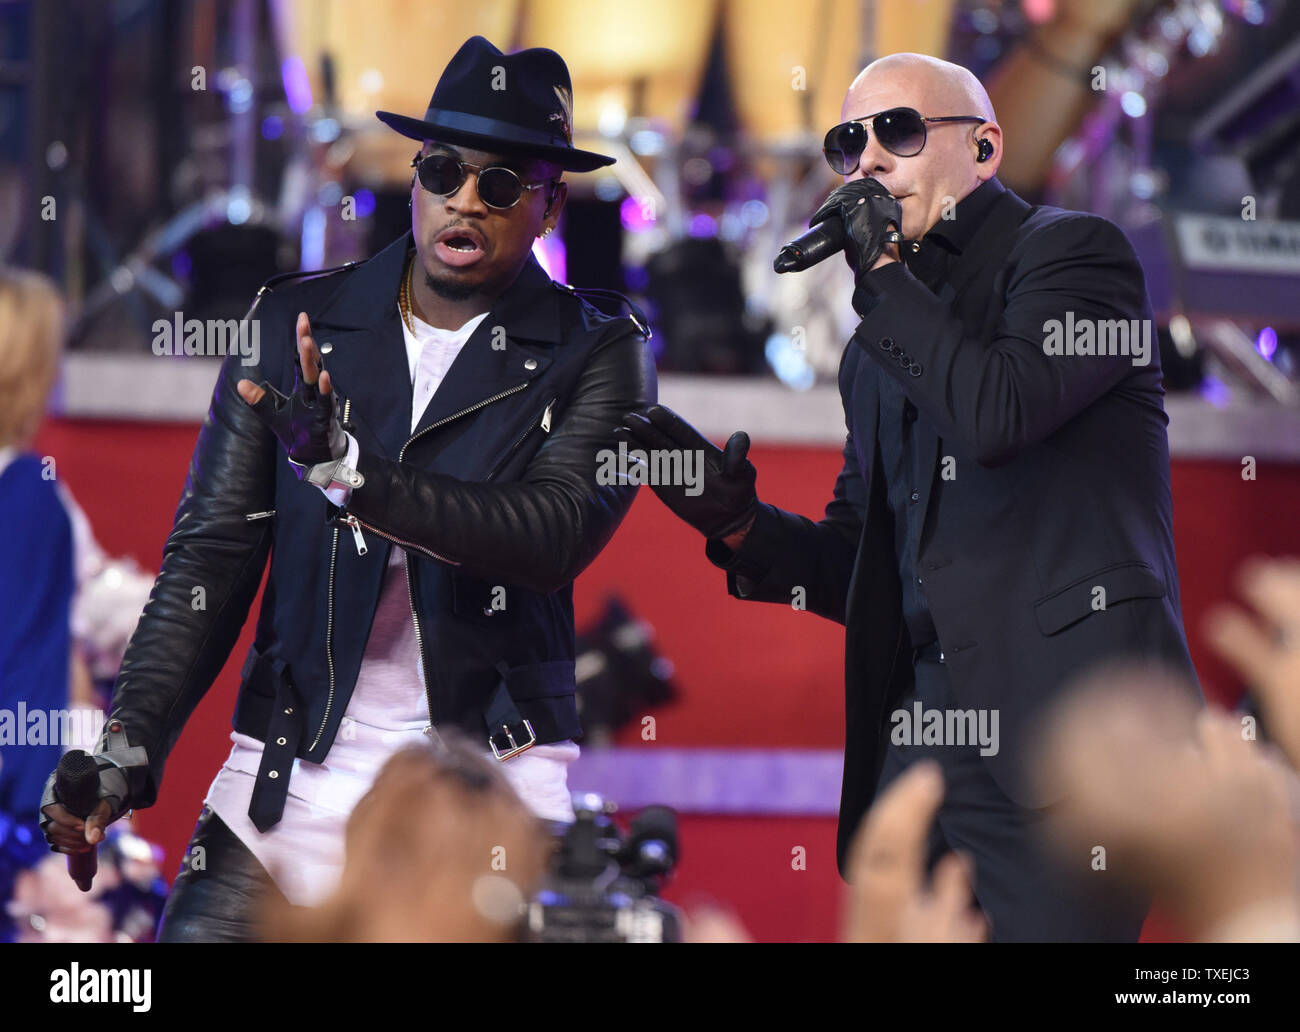 Rappers Ne-Yo and Pittbull perform during halftime of the Dallas Cowboys and Oakland Raiders game at AT&T Stadium in Arlington, Texas on November 27, 2014. For the past 17 years the Dallas Cowboys Thanksgiving Day halftime show has officially launched the Red Kettle Christmas Campaign on a national stage. Since the partnership began in 1997, the annual Red Kettle campaign has raised more than $1.75 billion, which has helped the Army to serve 30 million people each year.   UPI/Ian Halperin Stock Photo